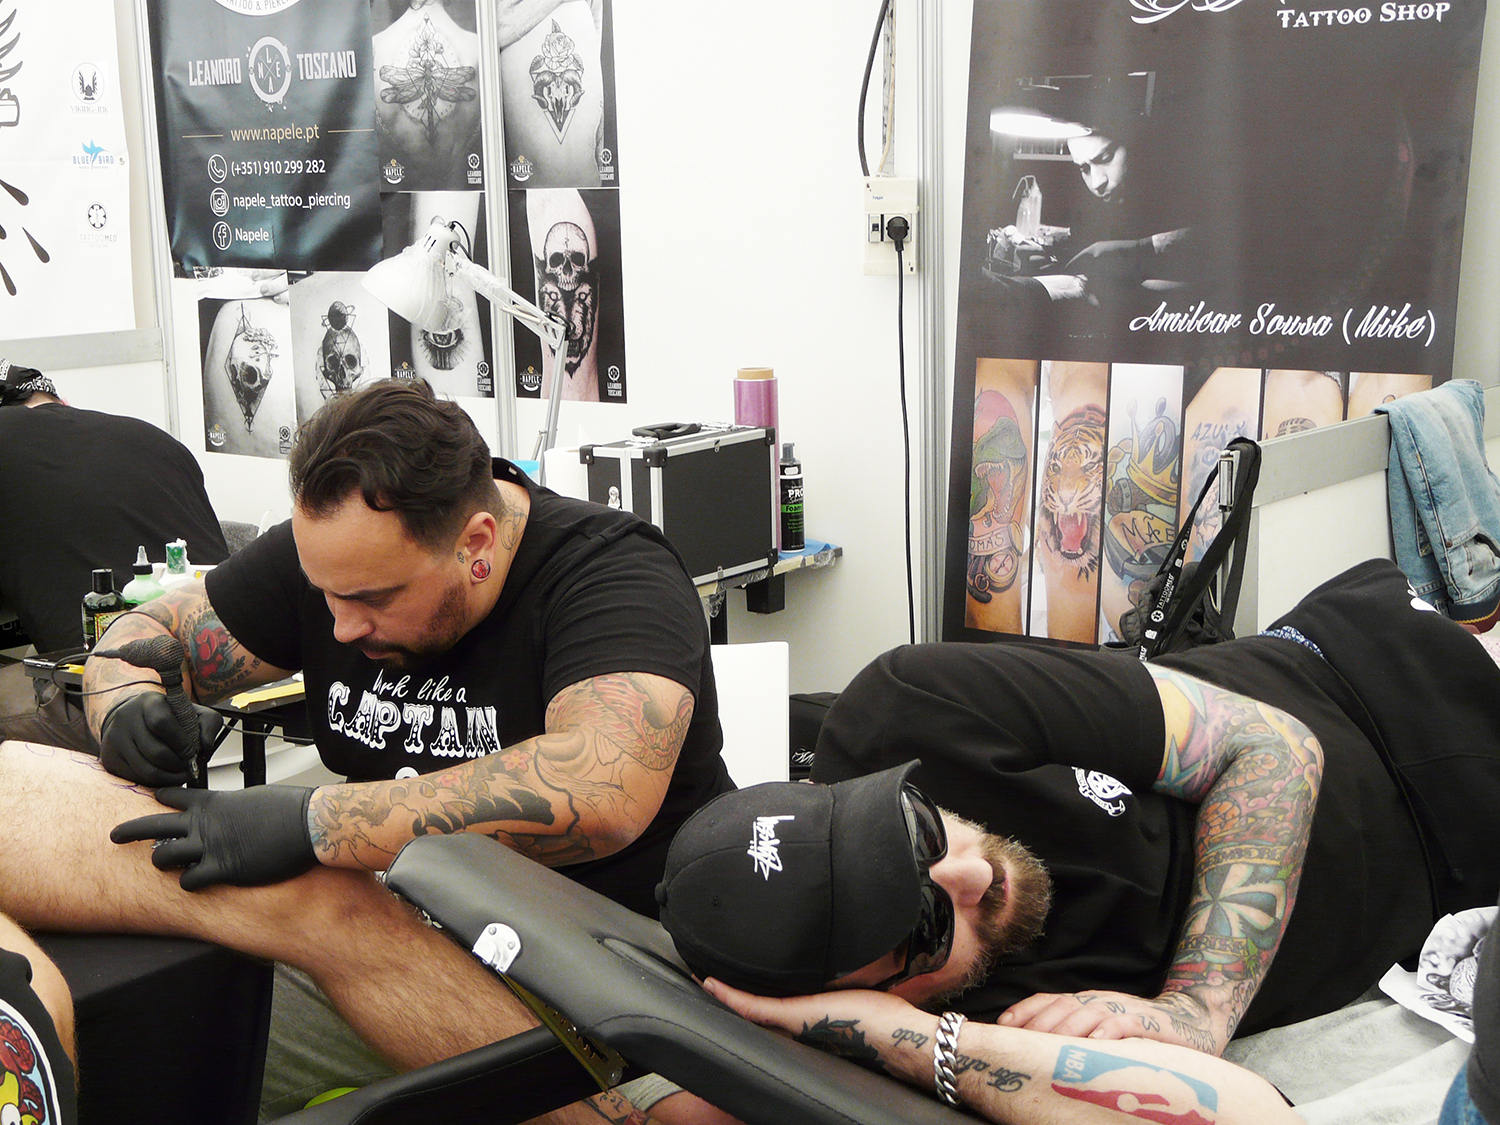 Amilcar Sousa (mike tattoo) working